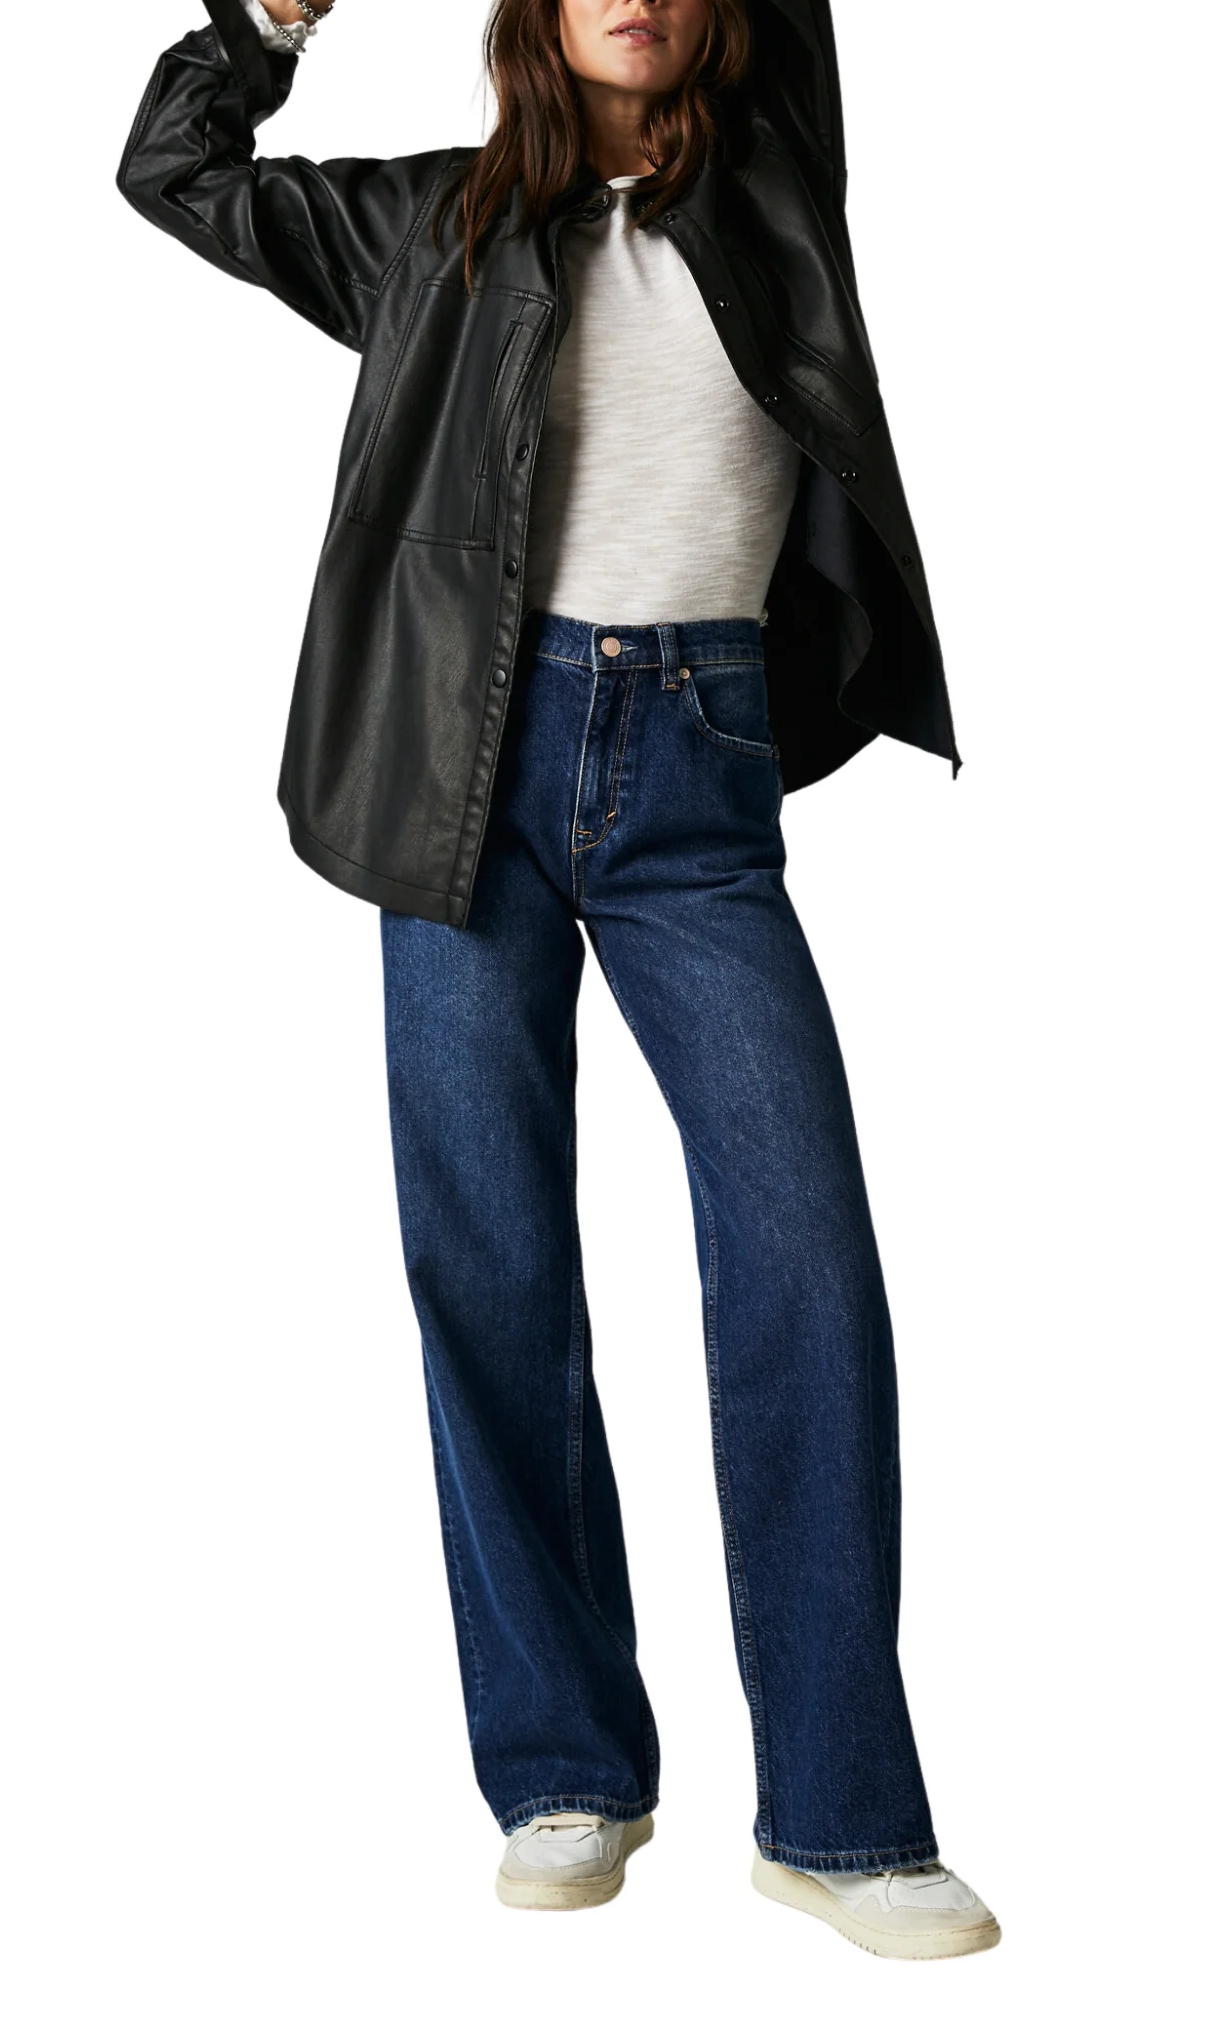 Tinsley Baggy High Rise Jeans in Dark Romance - Madison's Niche 